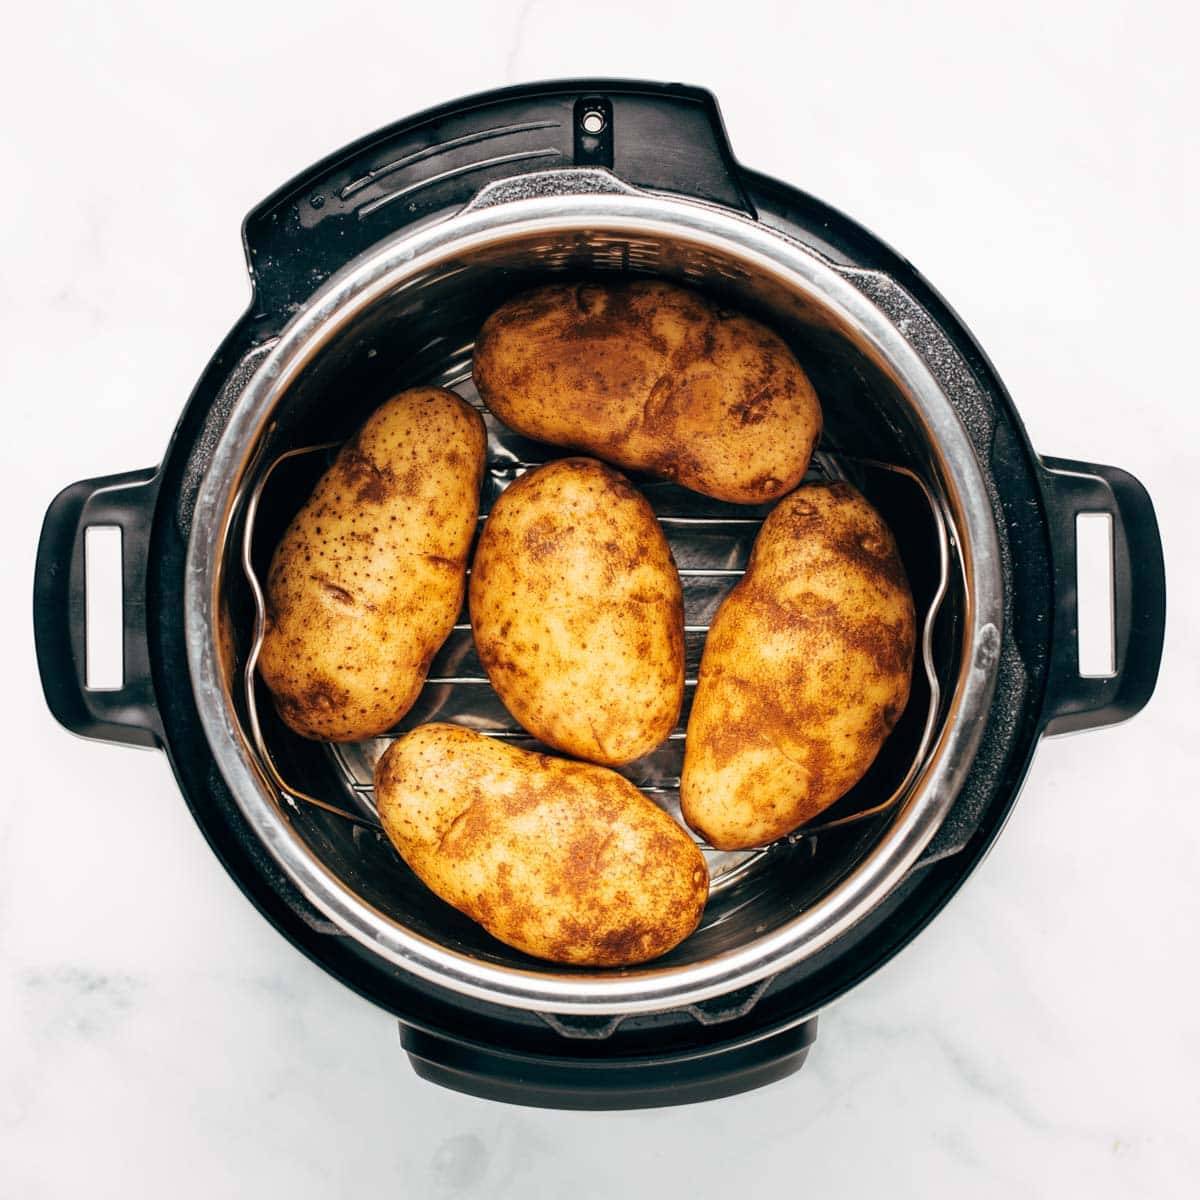 Potatoes in the Instant Pot.